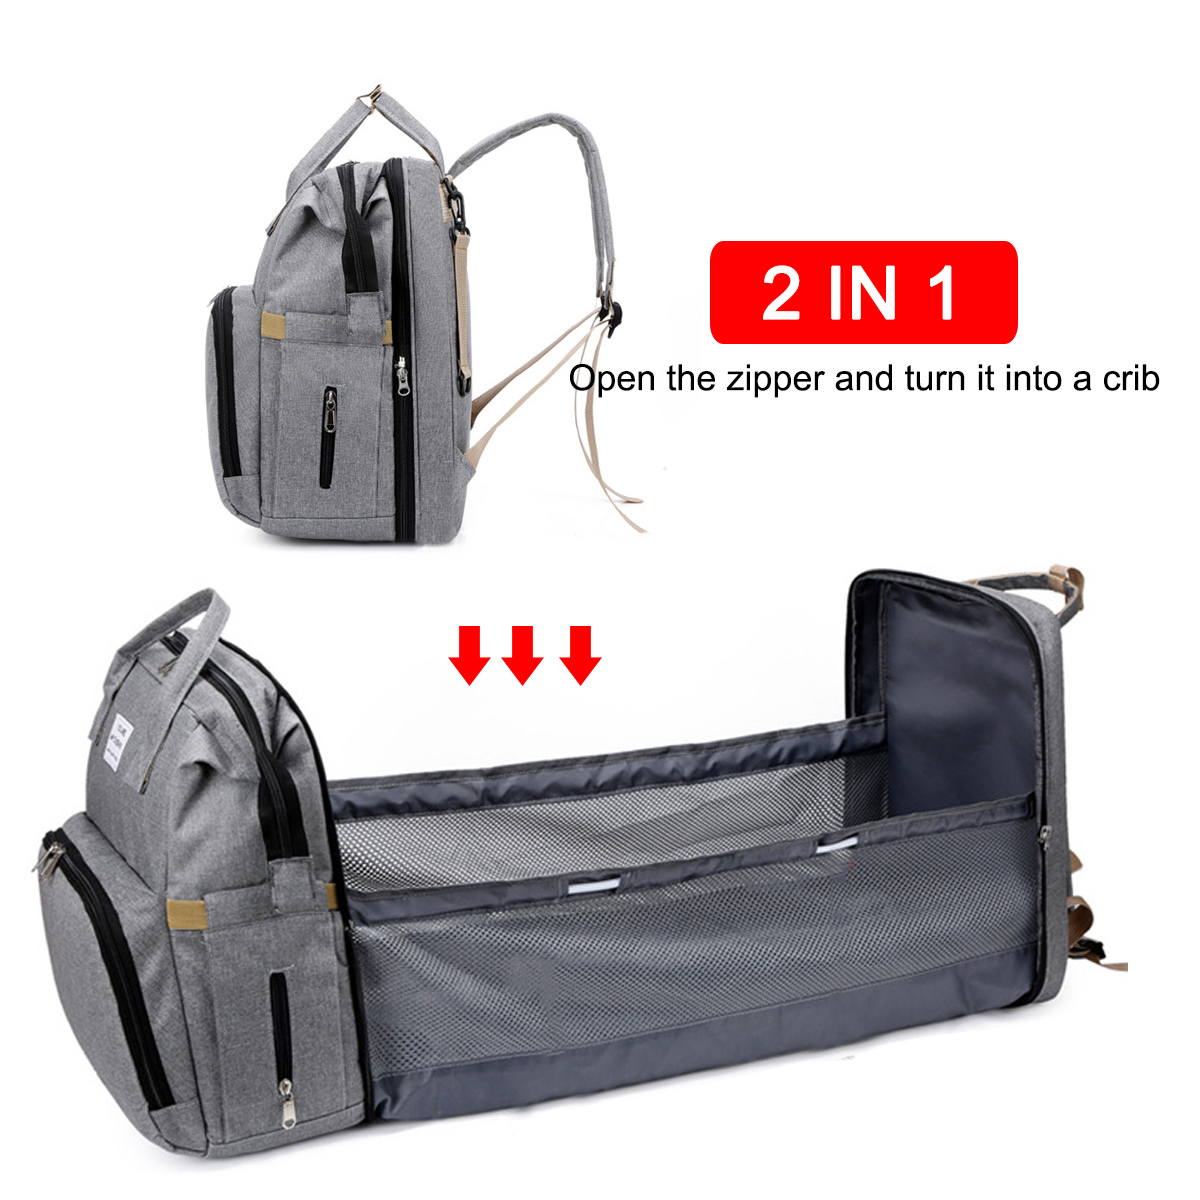 2-IN-1-Foldable-Diaper-Bag-Large-Capacity-Baby-Crib-Backpack-Nappy-Mummy-Bags-For-Mom-Outdoors-Trave-1826517-3